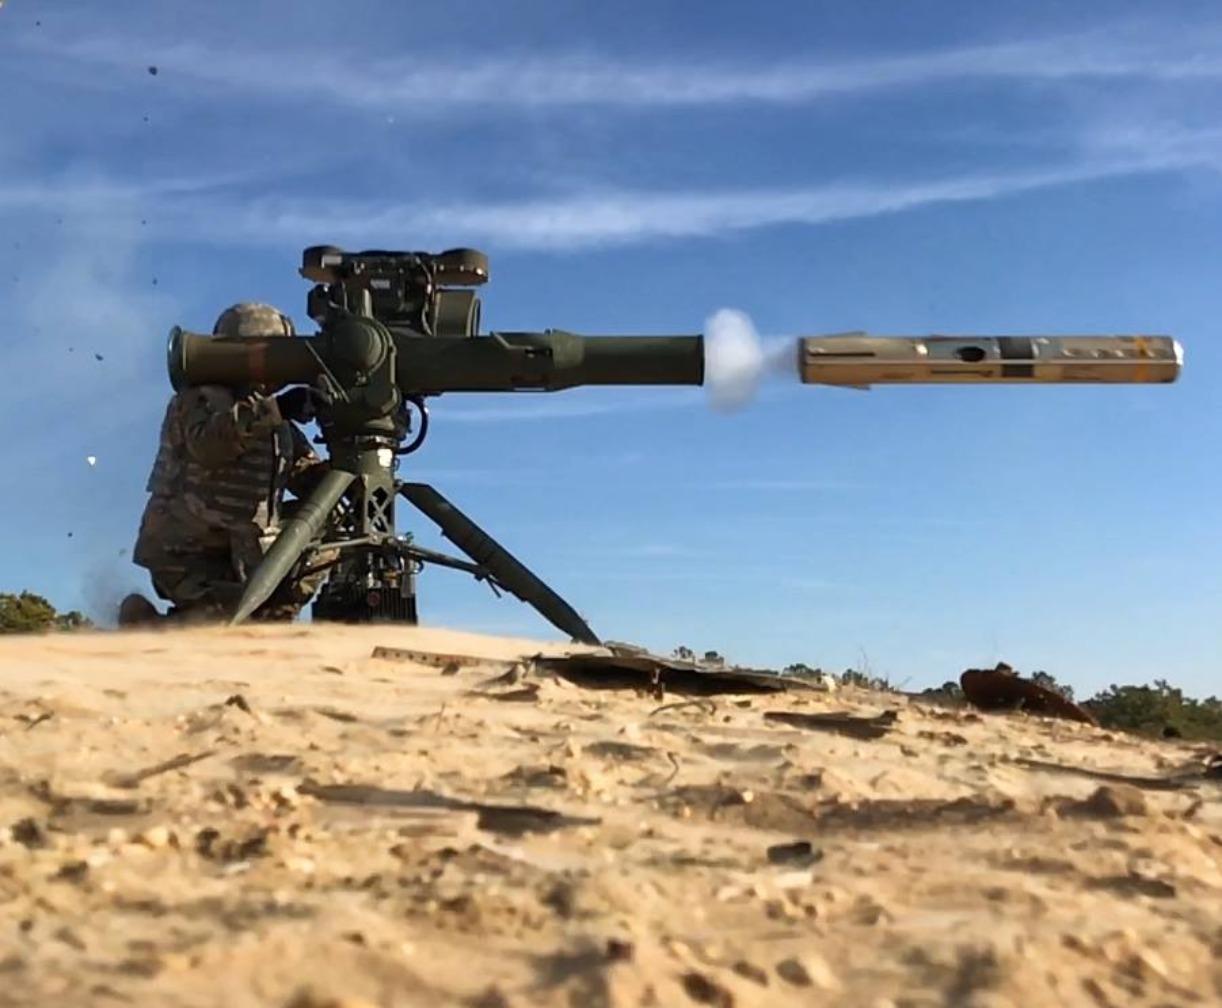 Tube-Launched, Optically-Tracked, Wire-Guided (TOW) missiles